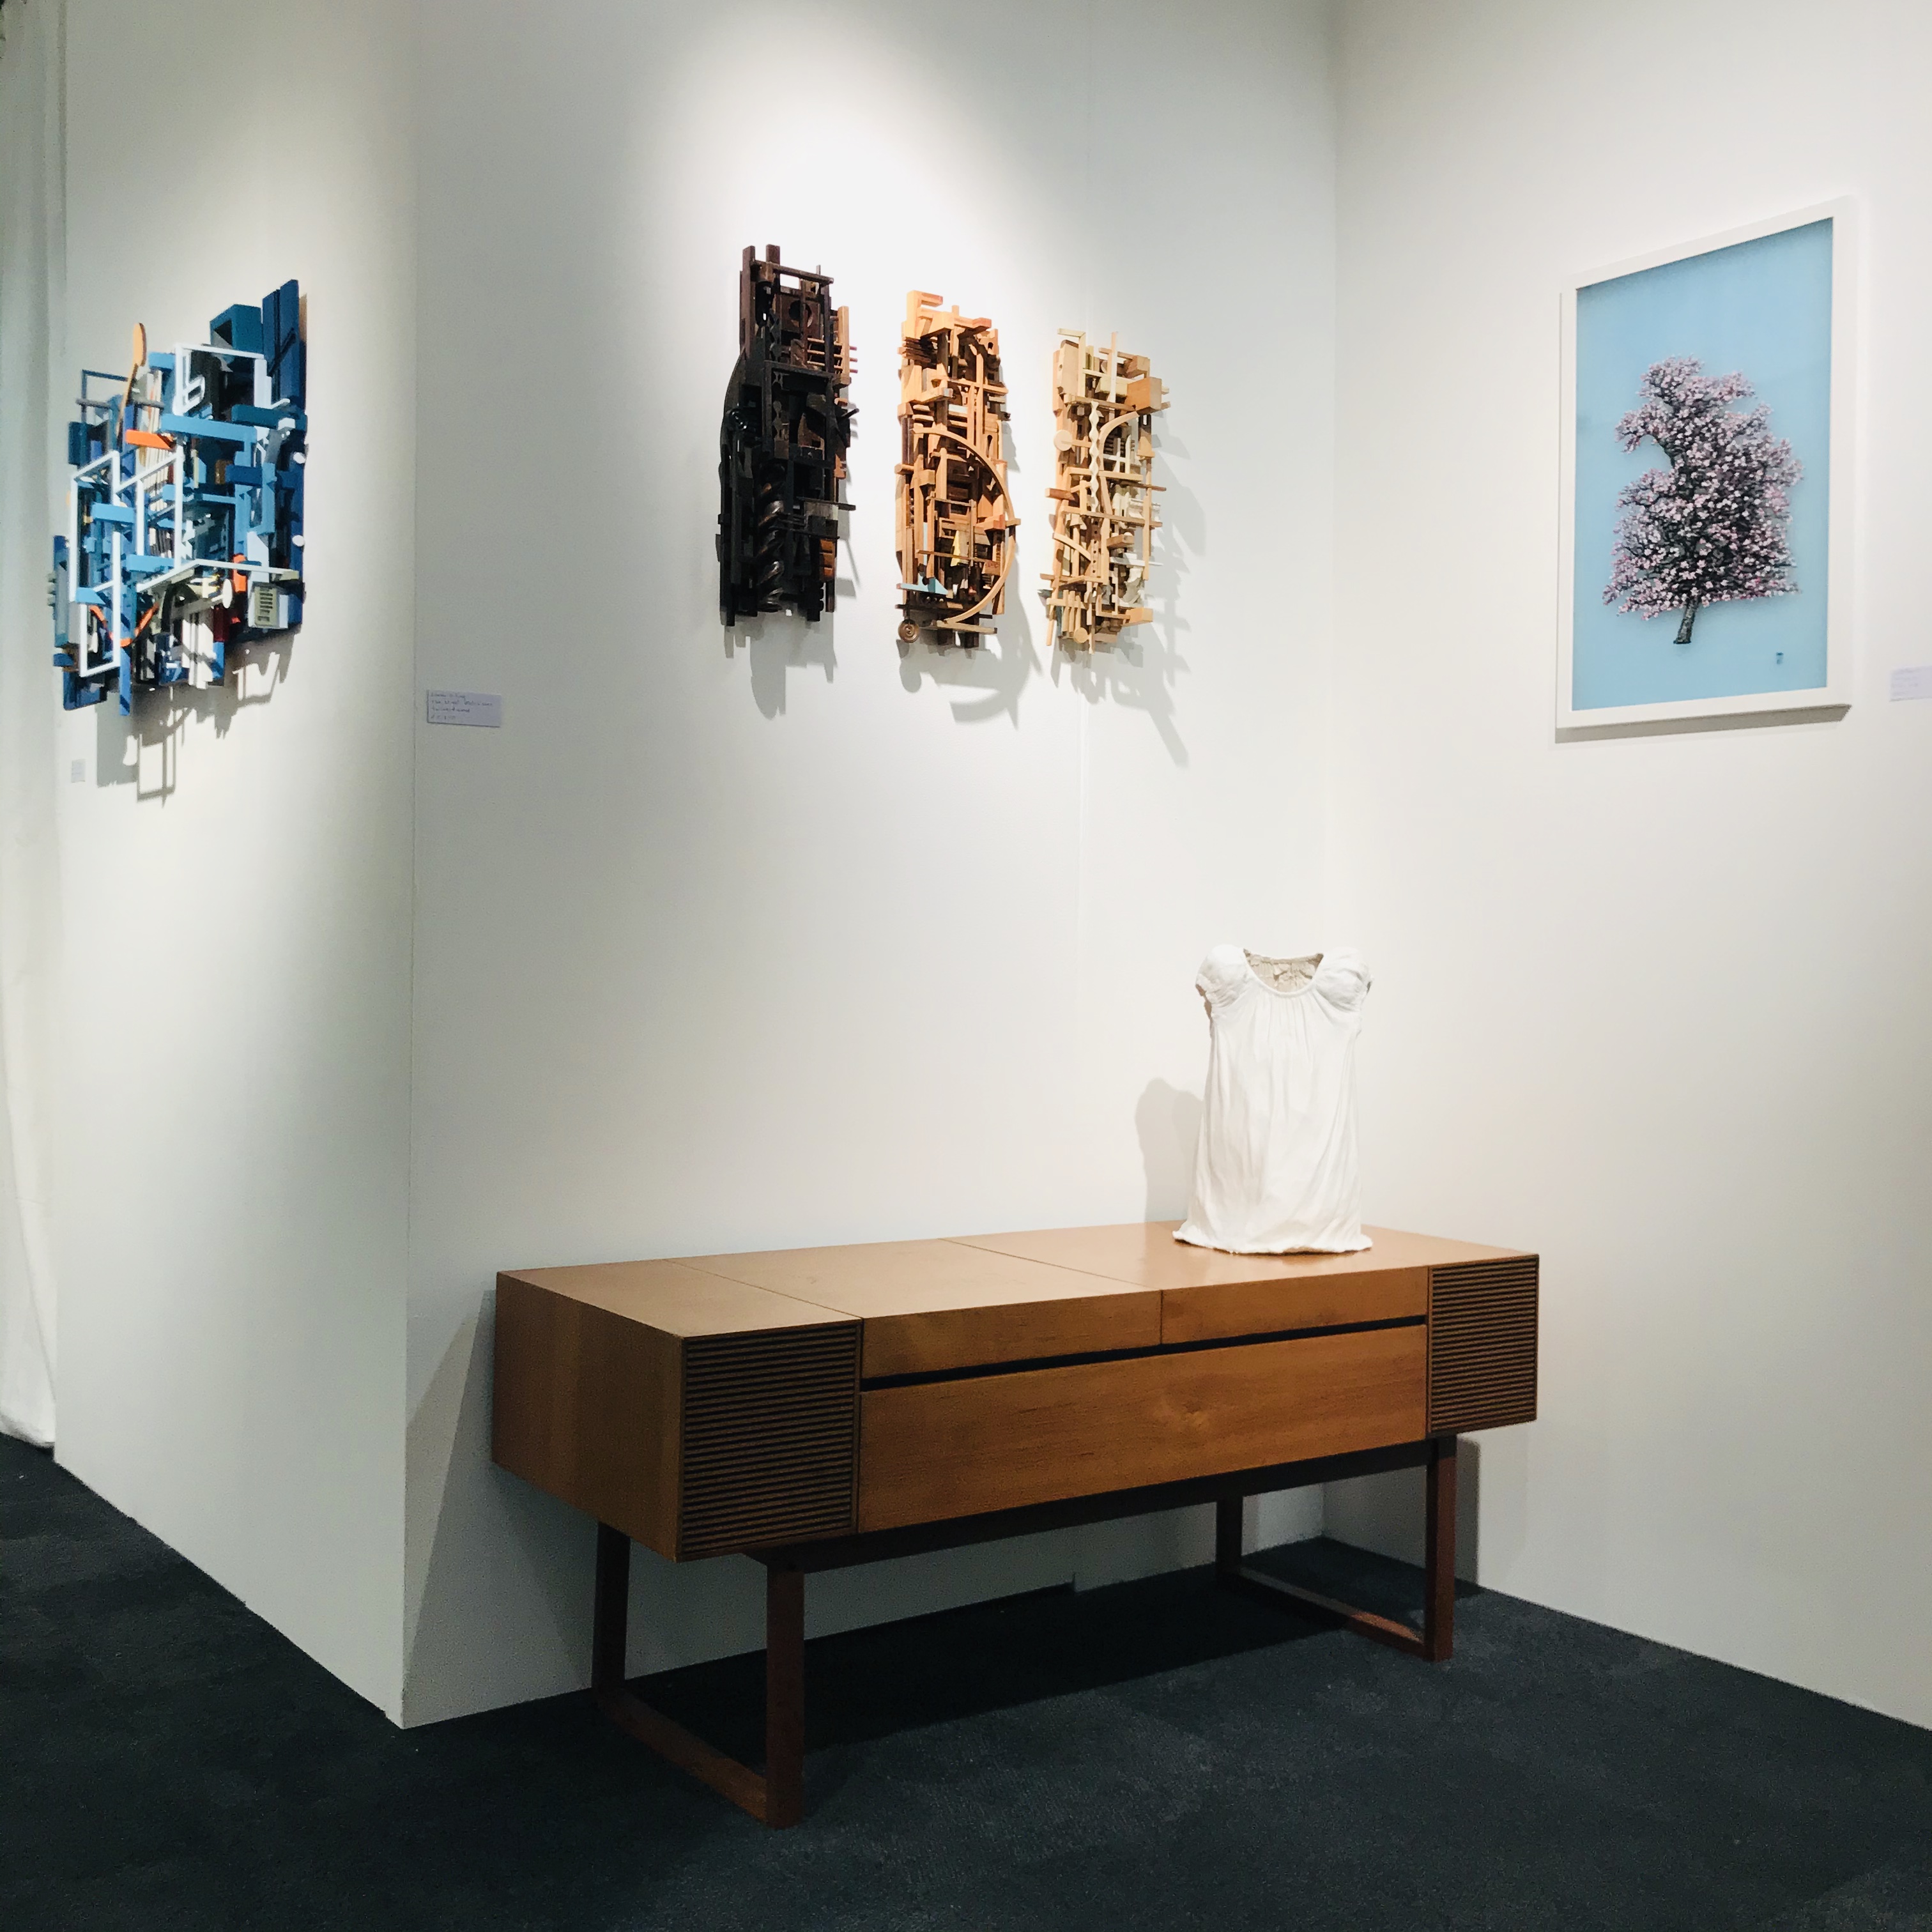 Urbane Art is delighted to be returning to the LAF this year with a new collection of works by Jack Frame, Natasha Barnes, Juliane Hundertmark, Frank Schroeder and Sylvia Tarvet.